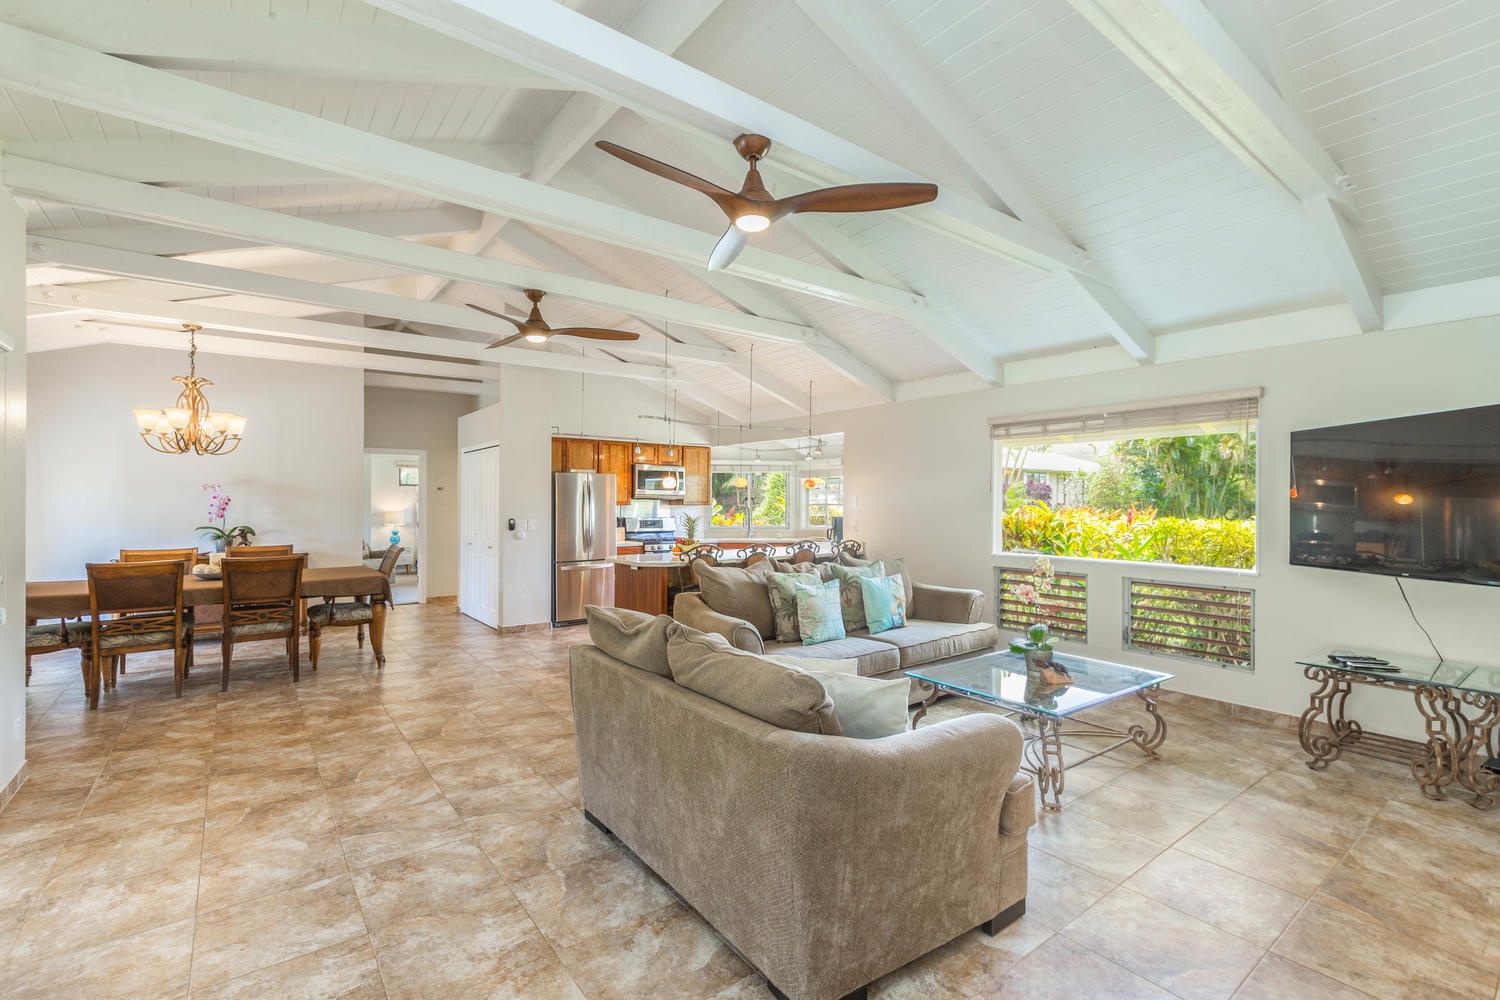 Princeville Vacation Rentals, Mala Hale - Mala Hale has an open concept layout with vaulted ceilings, ceiling fans and a living area that flows into the dining room